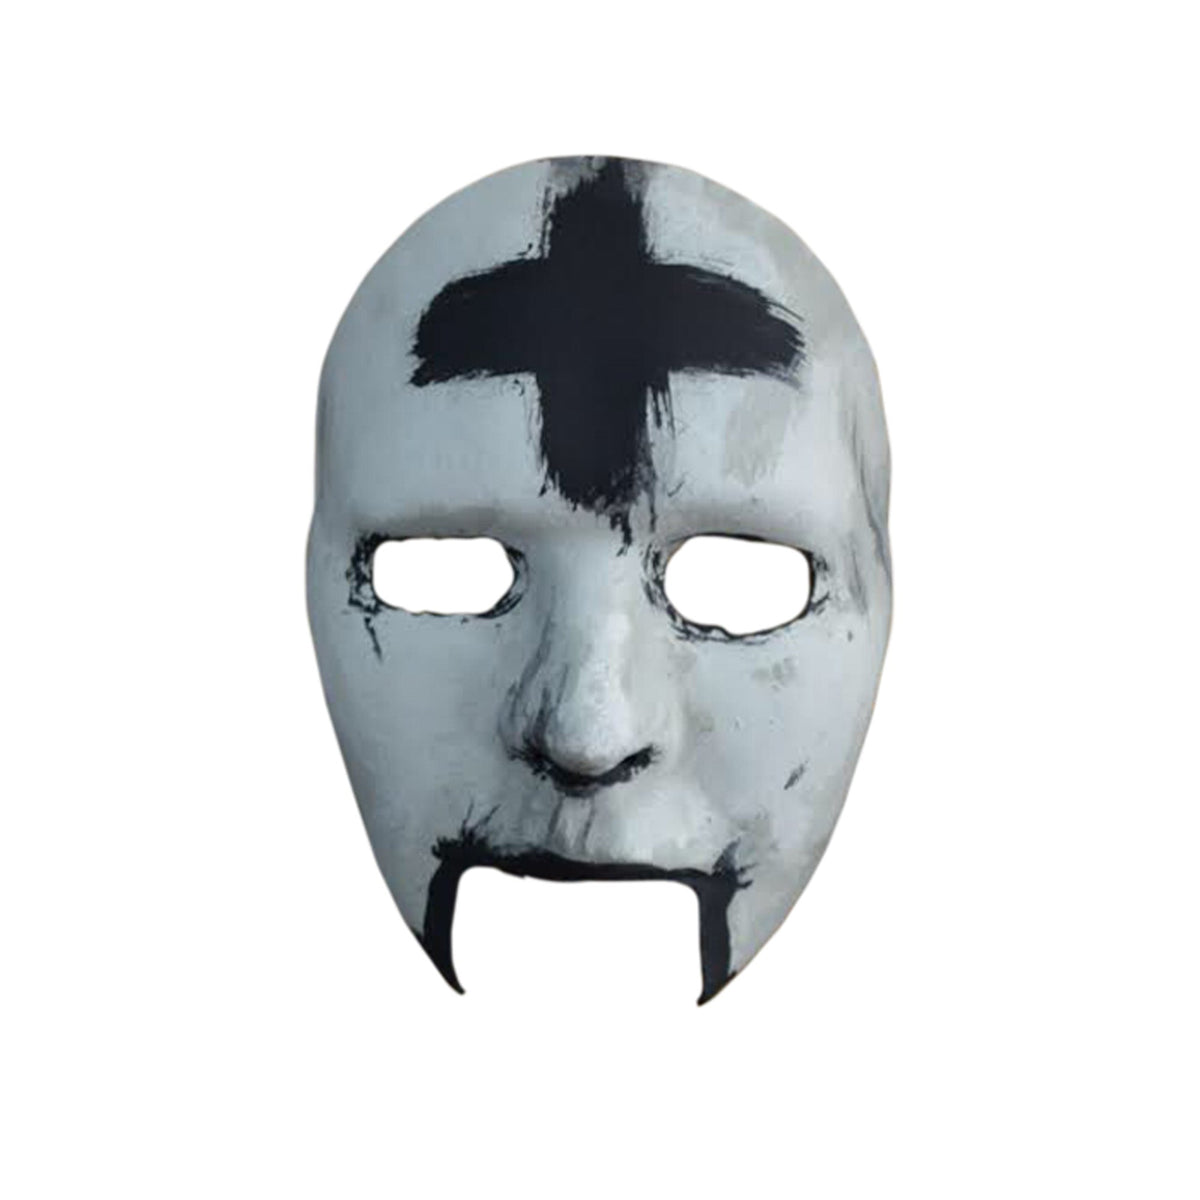 TRICK OR TREAT STUDIOS INC Costume Accessories The Purge Plus Mask for Adults 811501035695